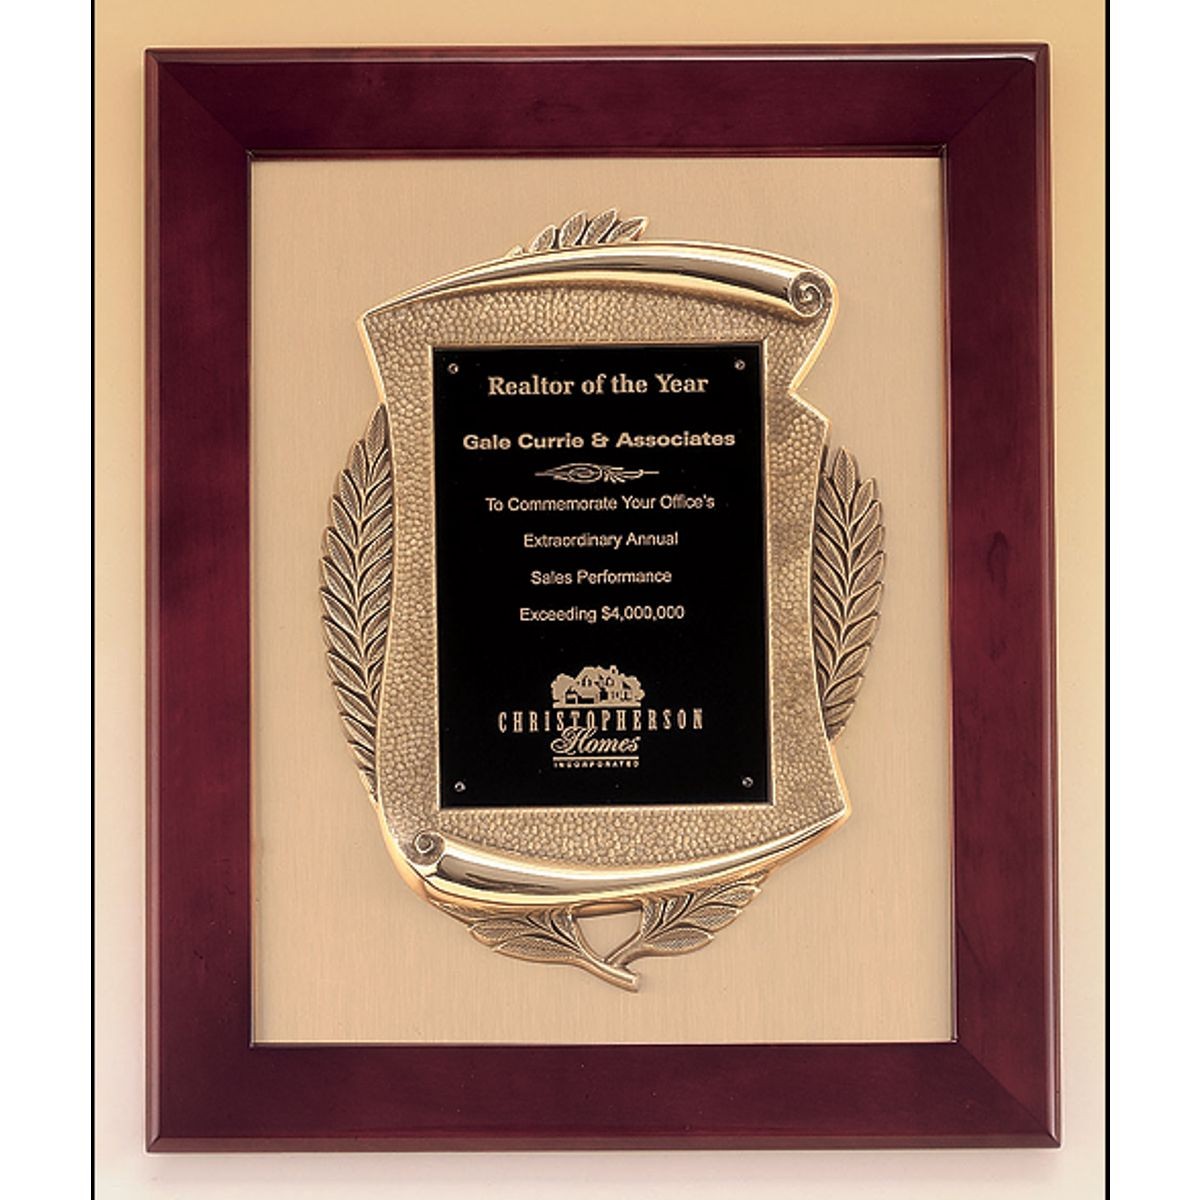 lamp of knowledge trophy plaque teal board gold border 7 x 9 